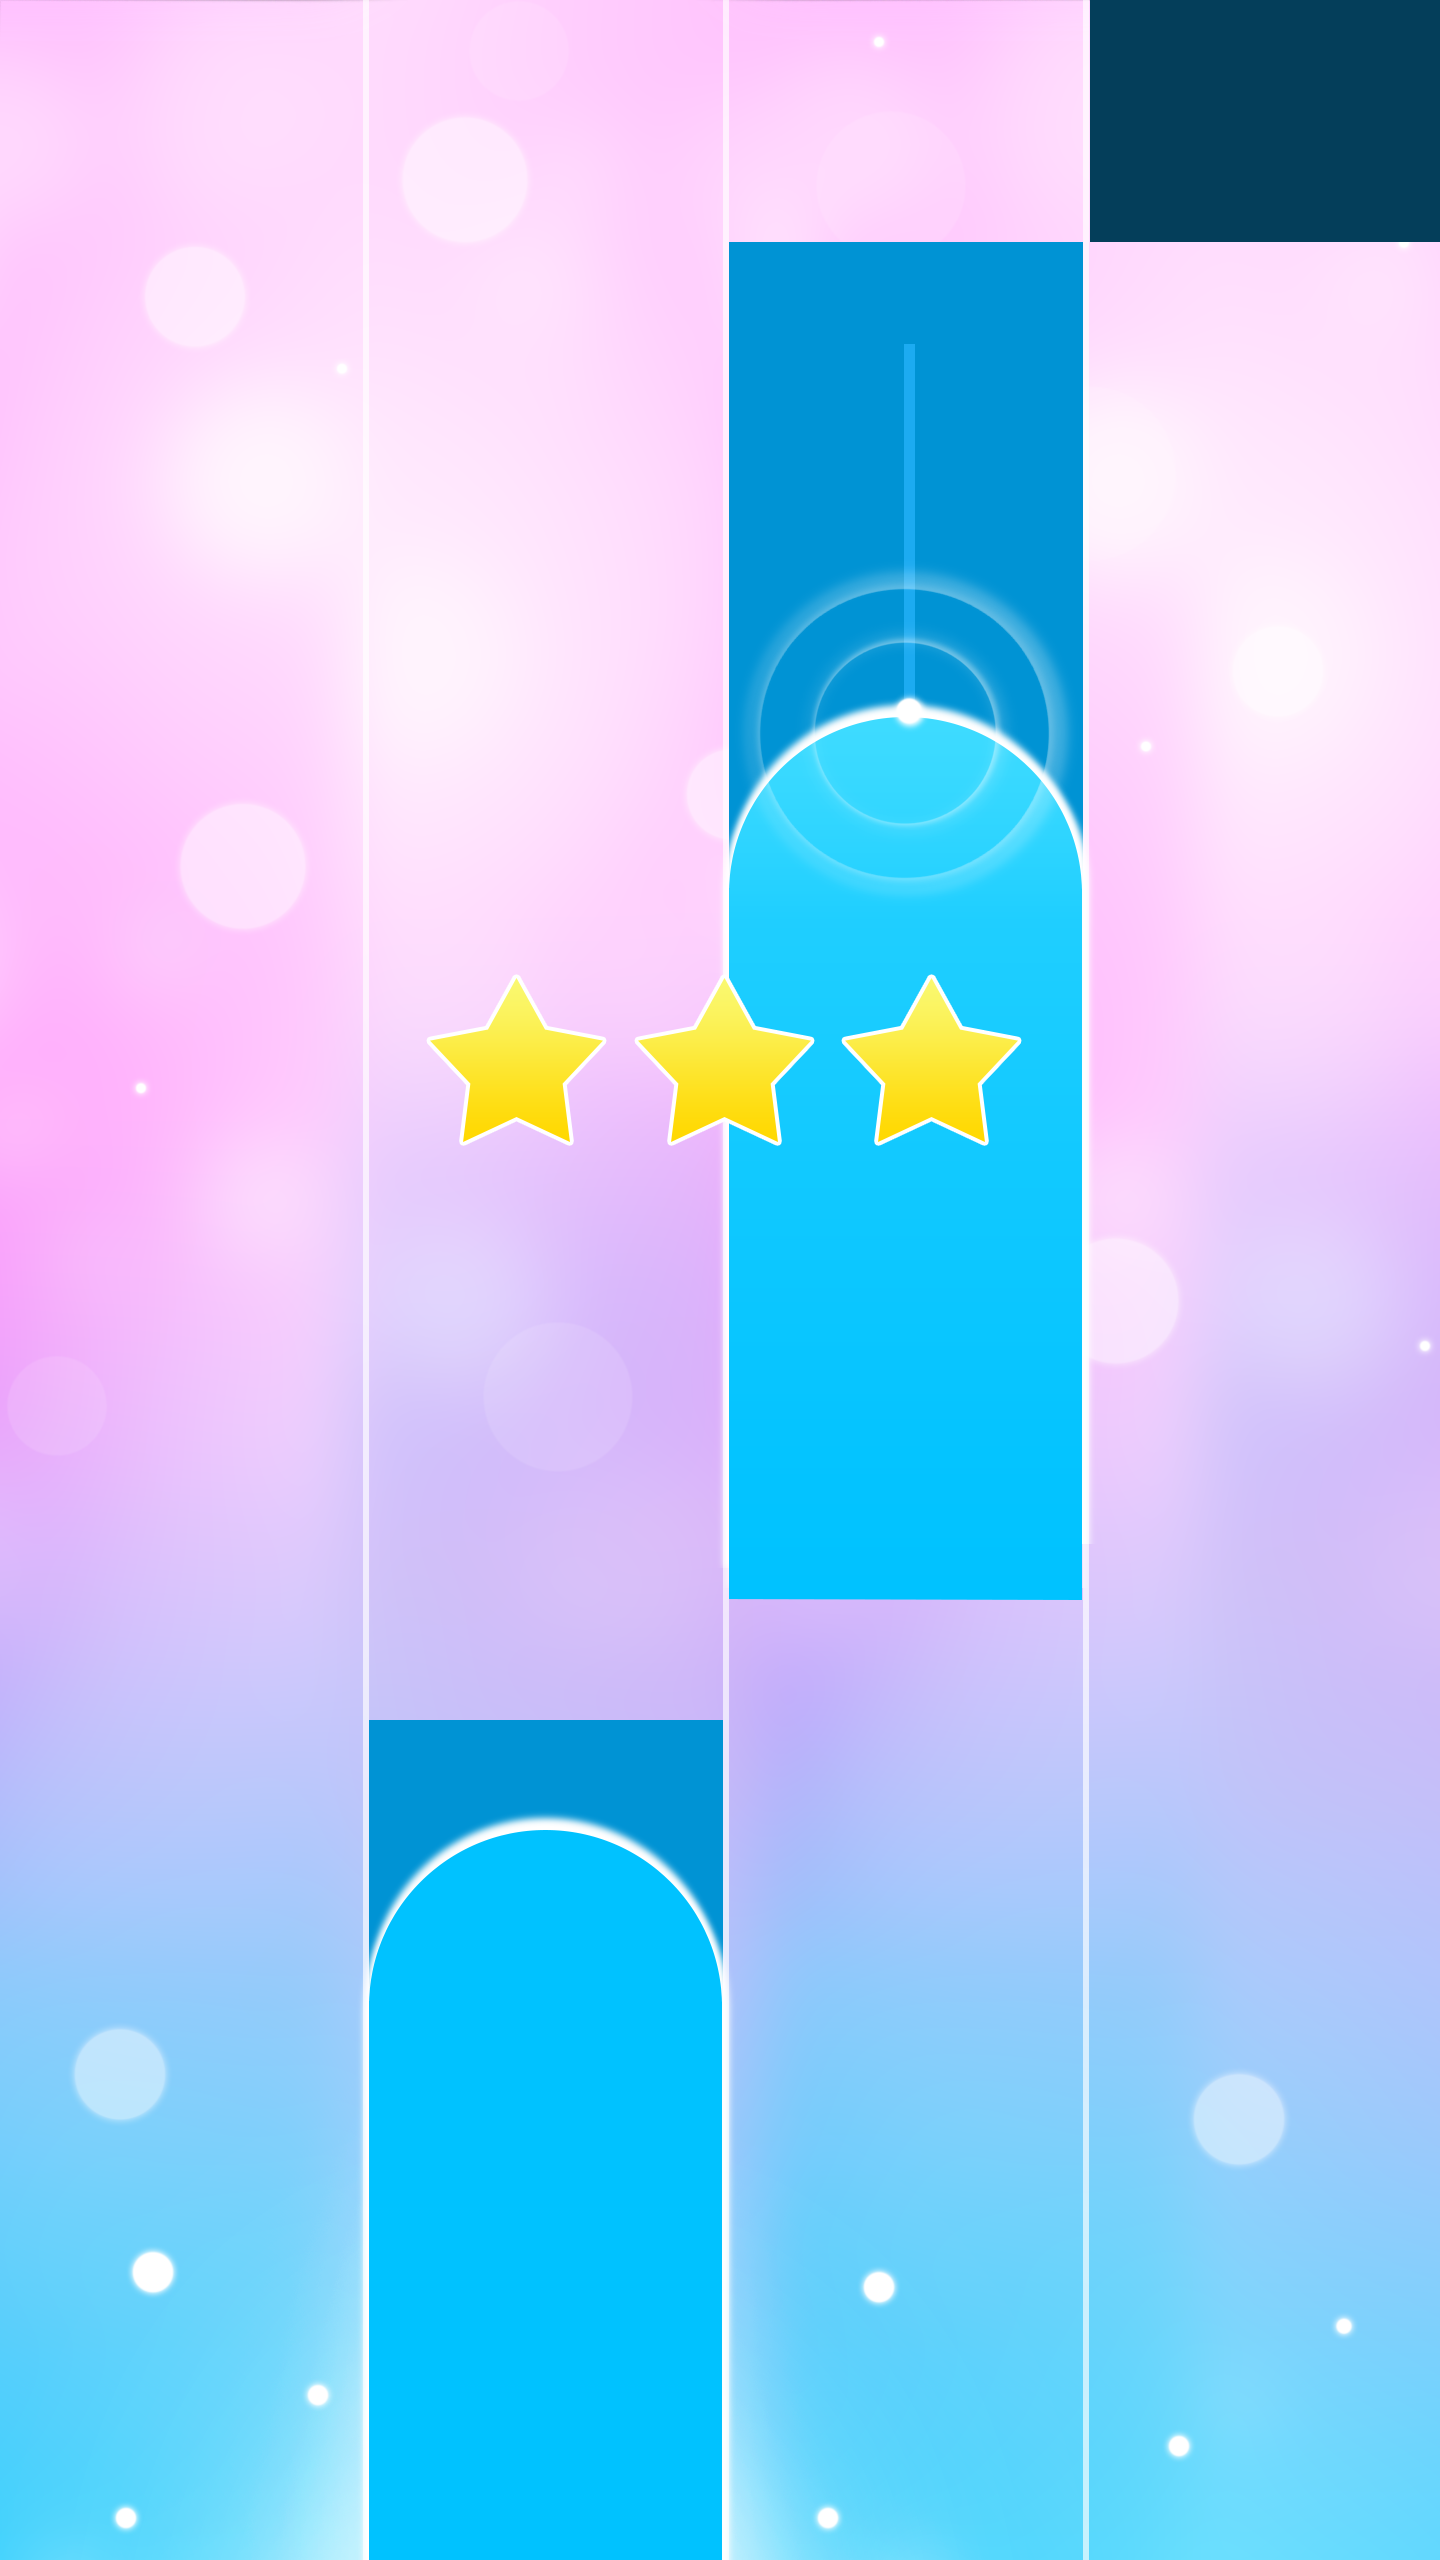 Magic Tiles 3 - Piano Game APK (Android Game) - Free Download